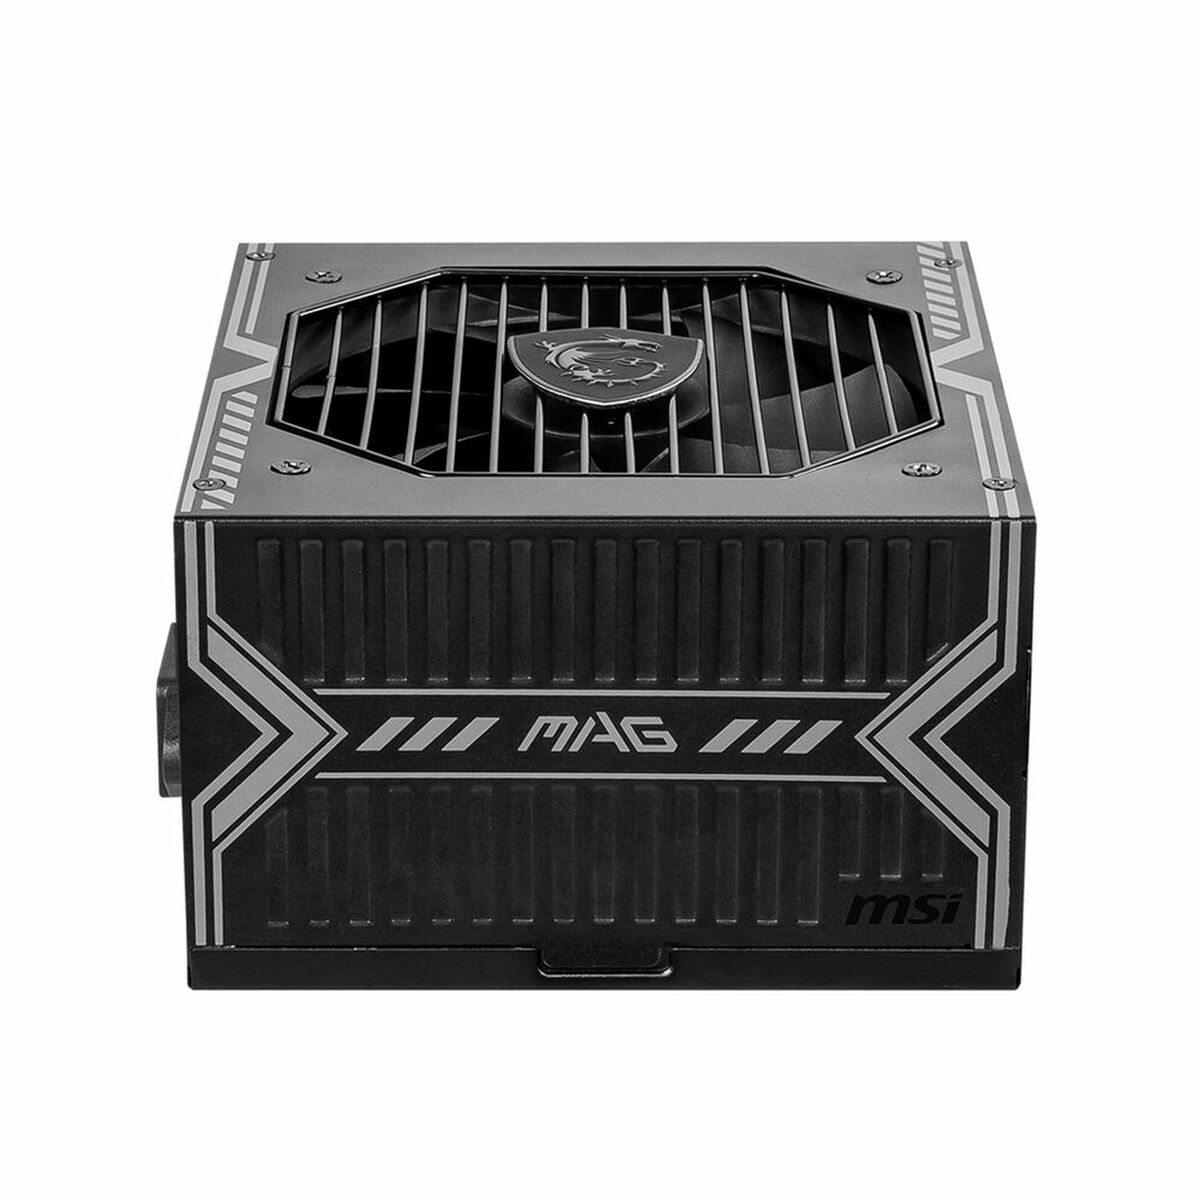 Power supply MSI MAG A650BN 650 W 80 Plus Bronze, MSI, Computing, Components, power-supply-msi-mag-a650bn-650-w-80-plus-bronze, Brand_MSI, category-reference-2609, category-reference-2803, category-reference-2816, category-reference-t-19685, category-reference-t-19912, category-reference-t-21360, computers / components, Condition_NEW, ferretería, Price_50 - 100, Teleworking, RiotNook